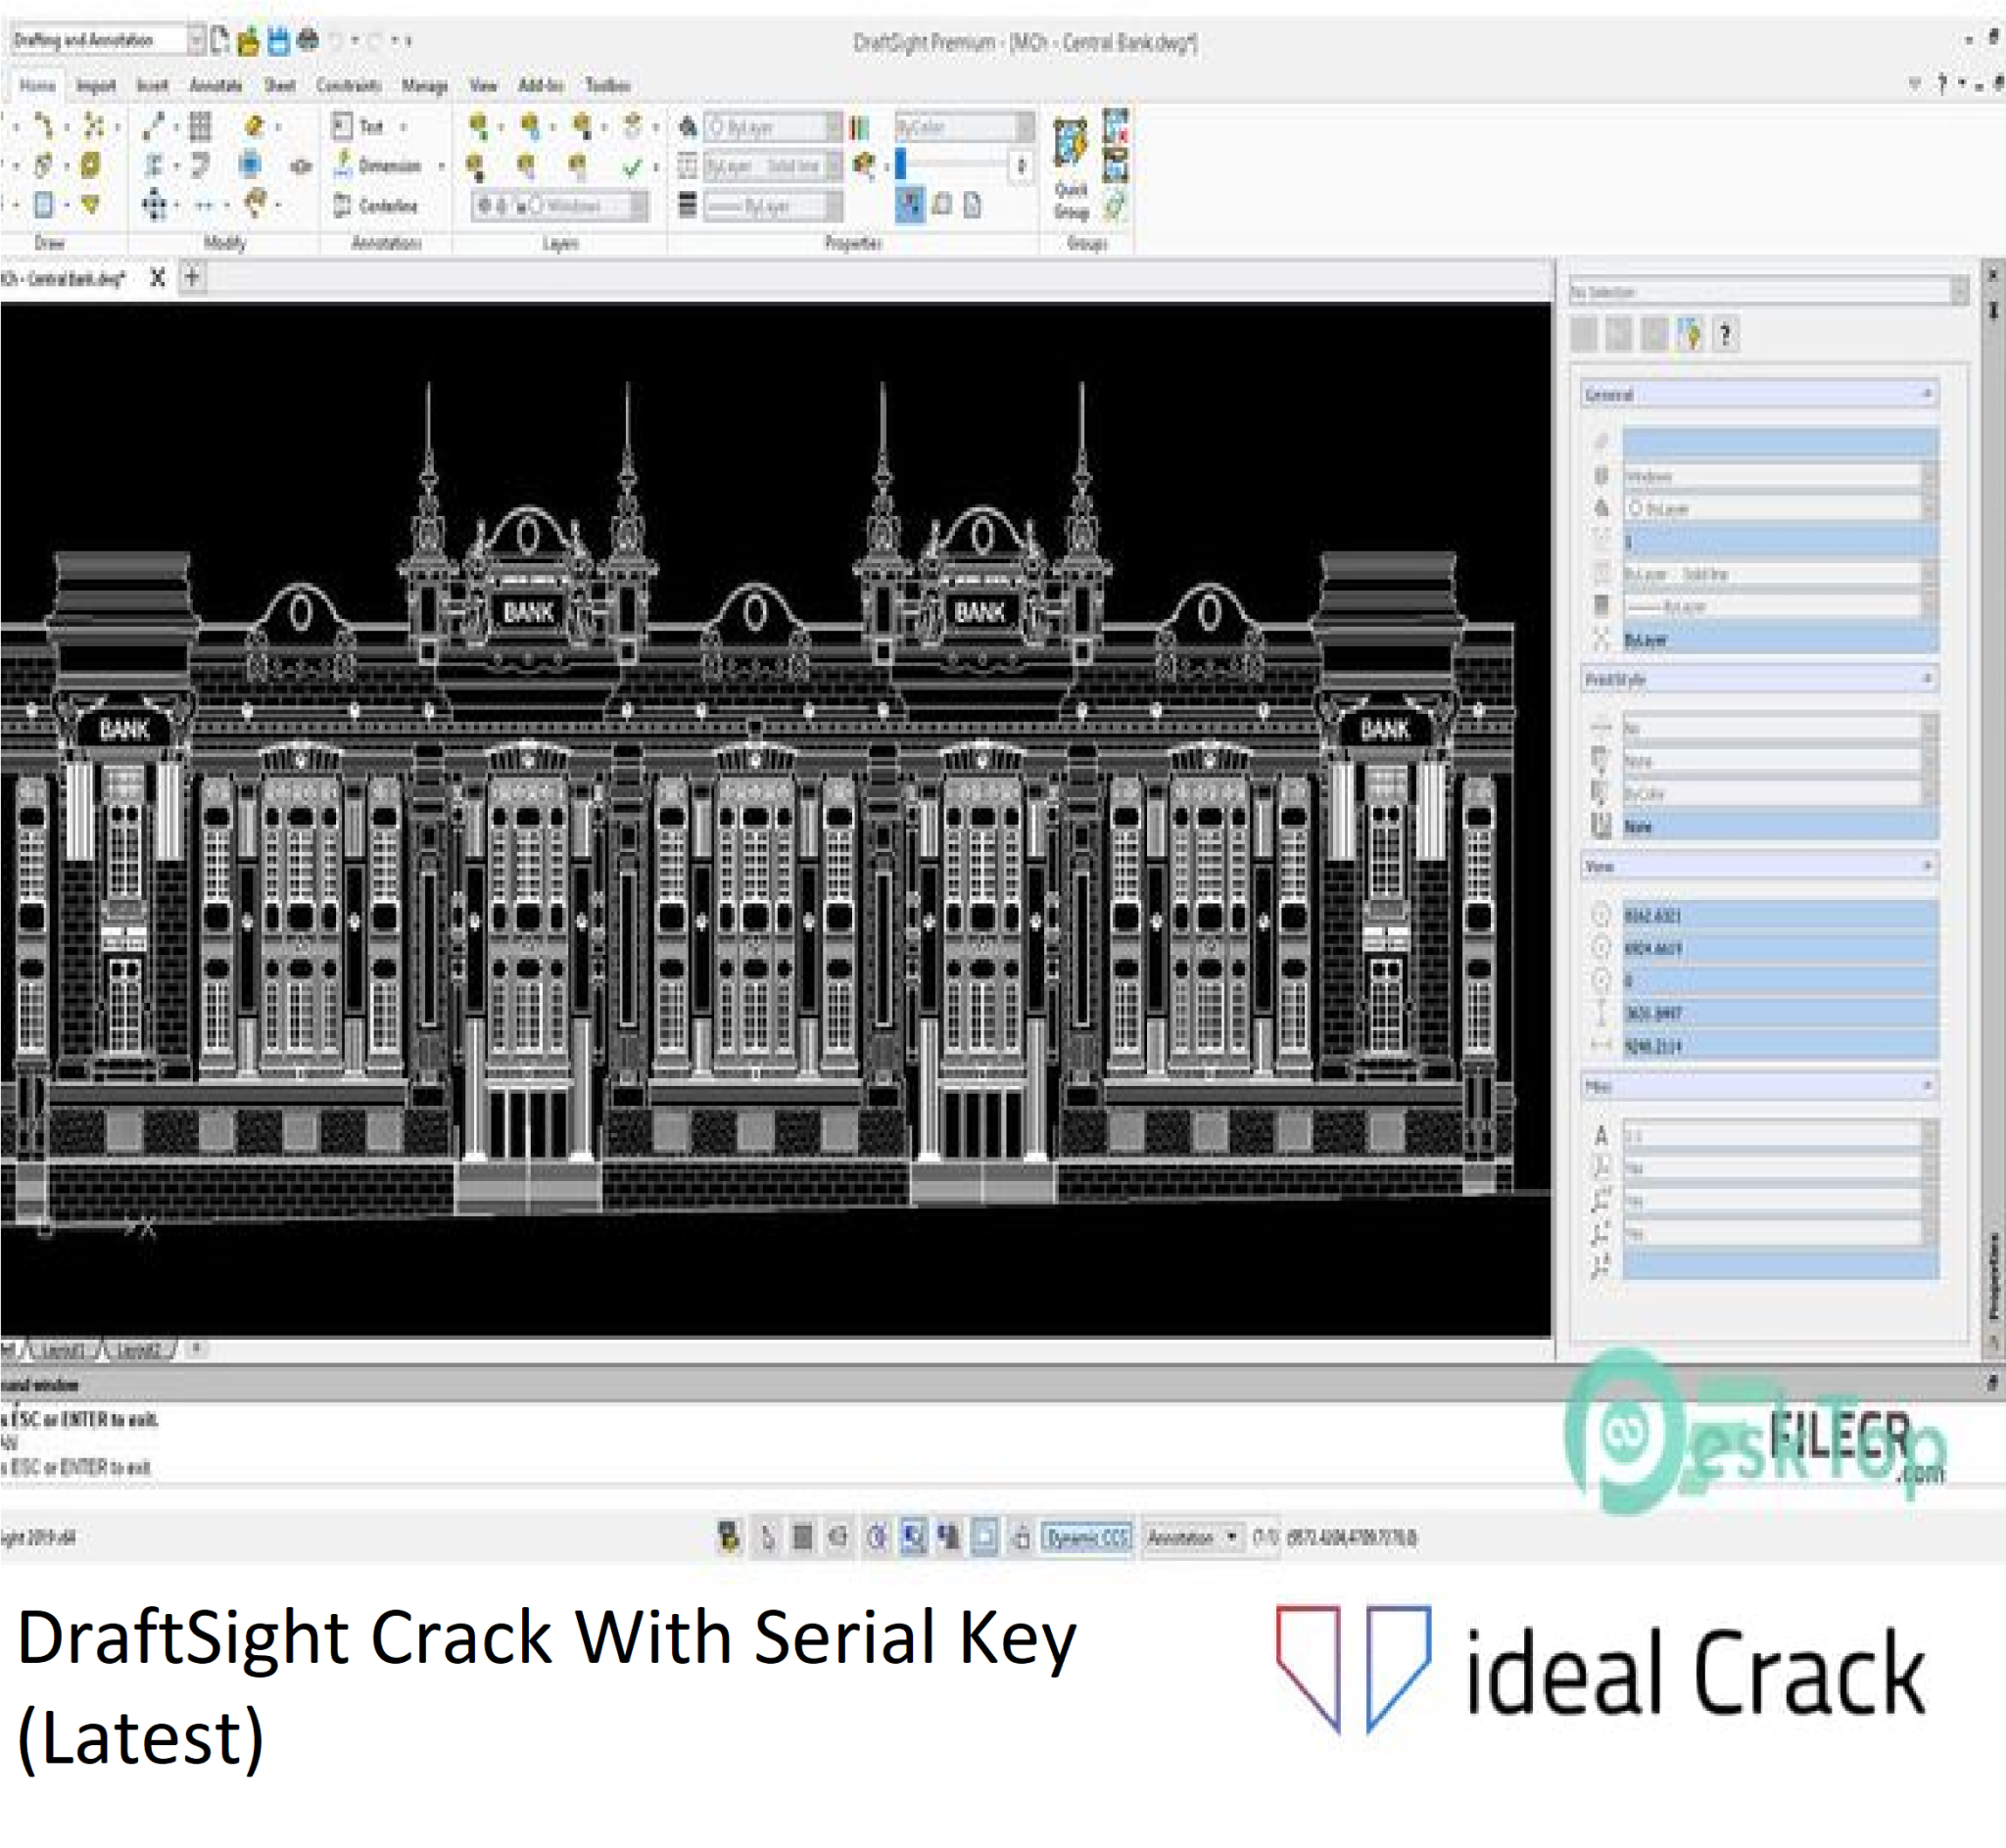 DraftSight Crack With Serial Key (Latest) 2023 Ideal Crack